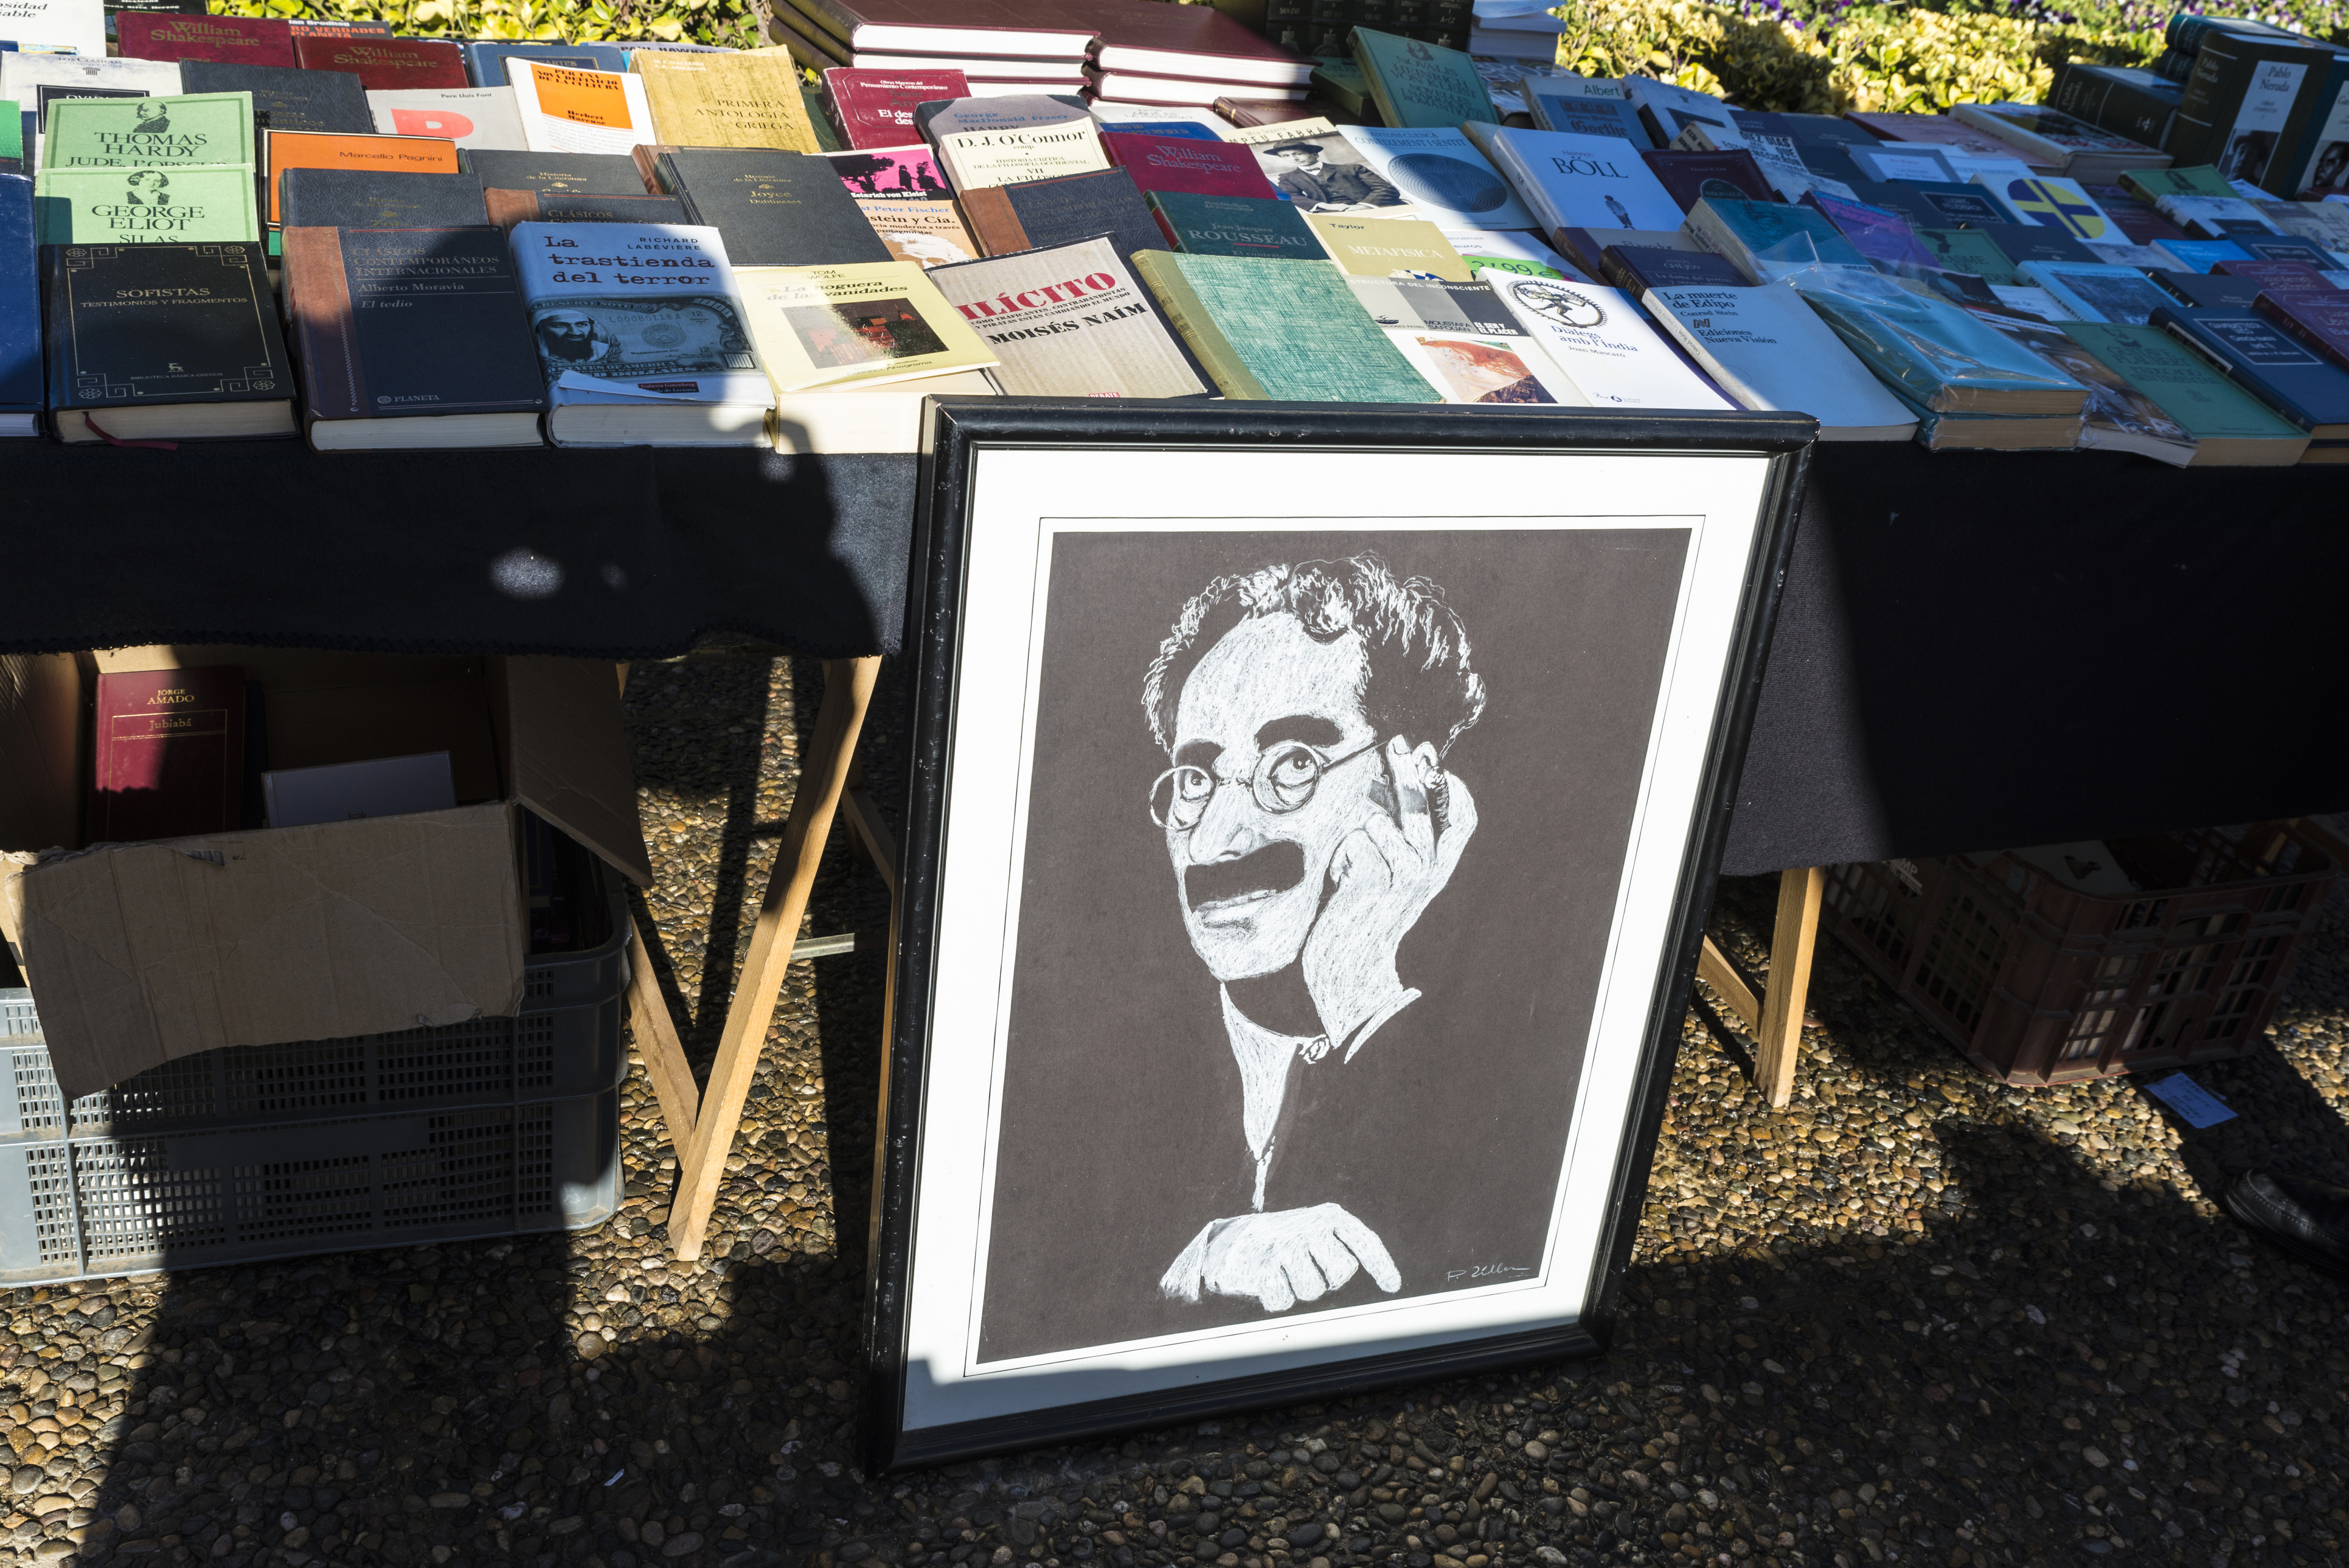 Girona, Spain - December 28, 2014: Objects used, furniture, artwork and ornaments on a market stall in the flea market in Girona, also known as Mercat de la Lleona. This image highlights a drawing of Groucho Marx